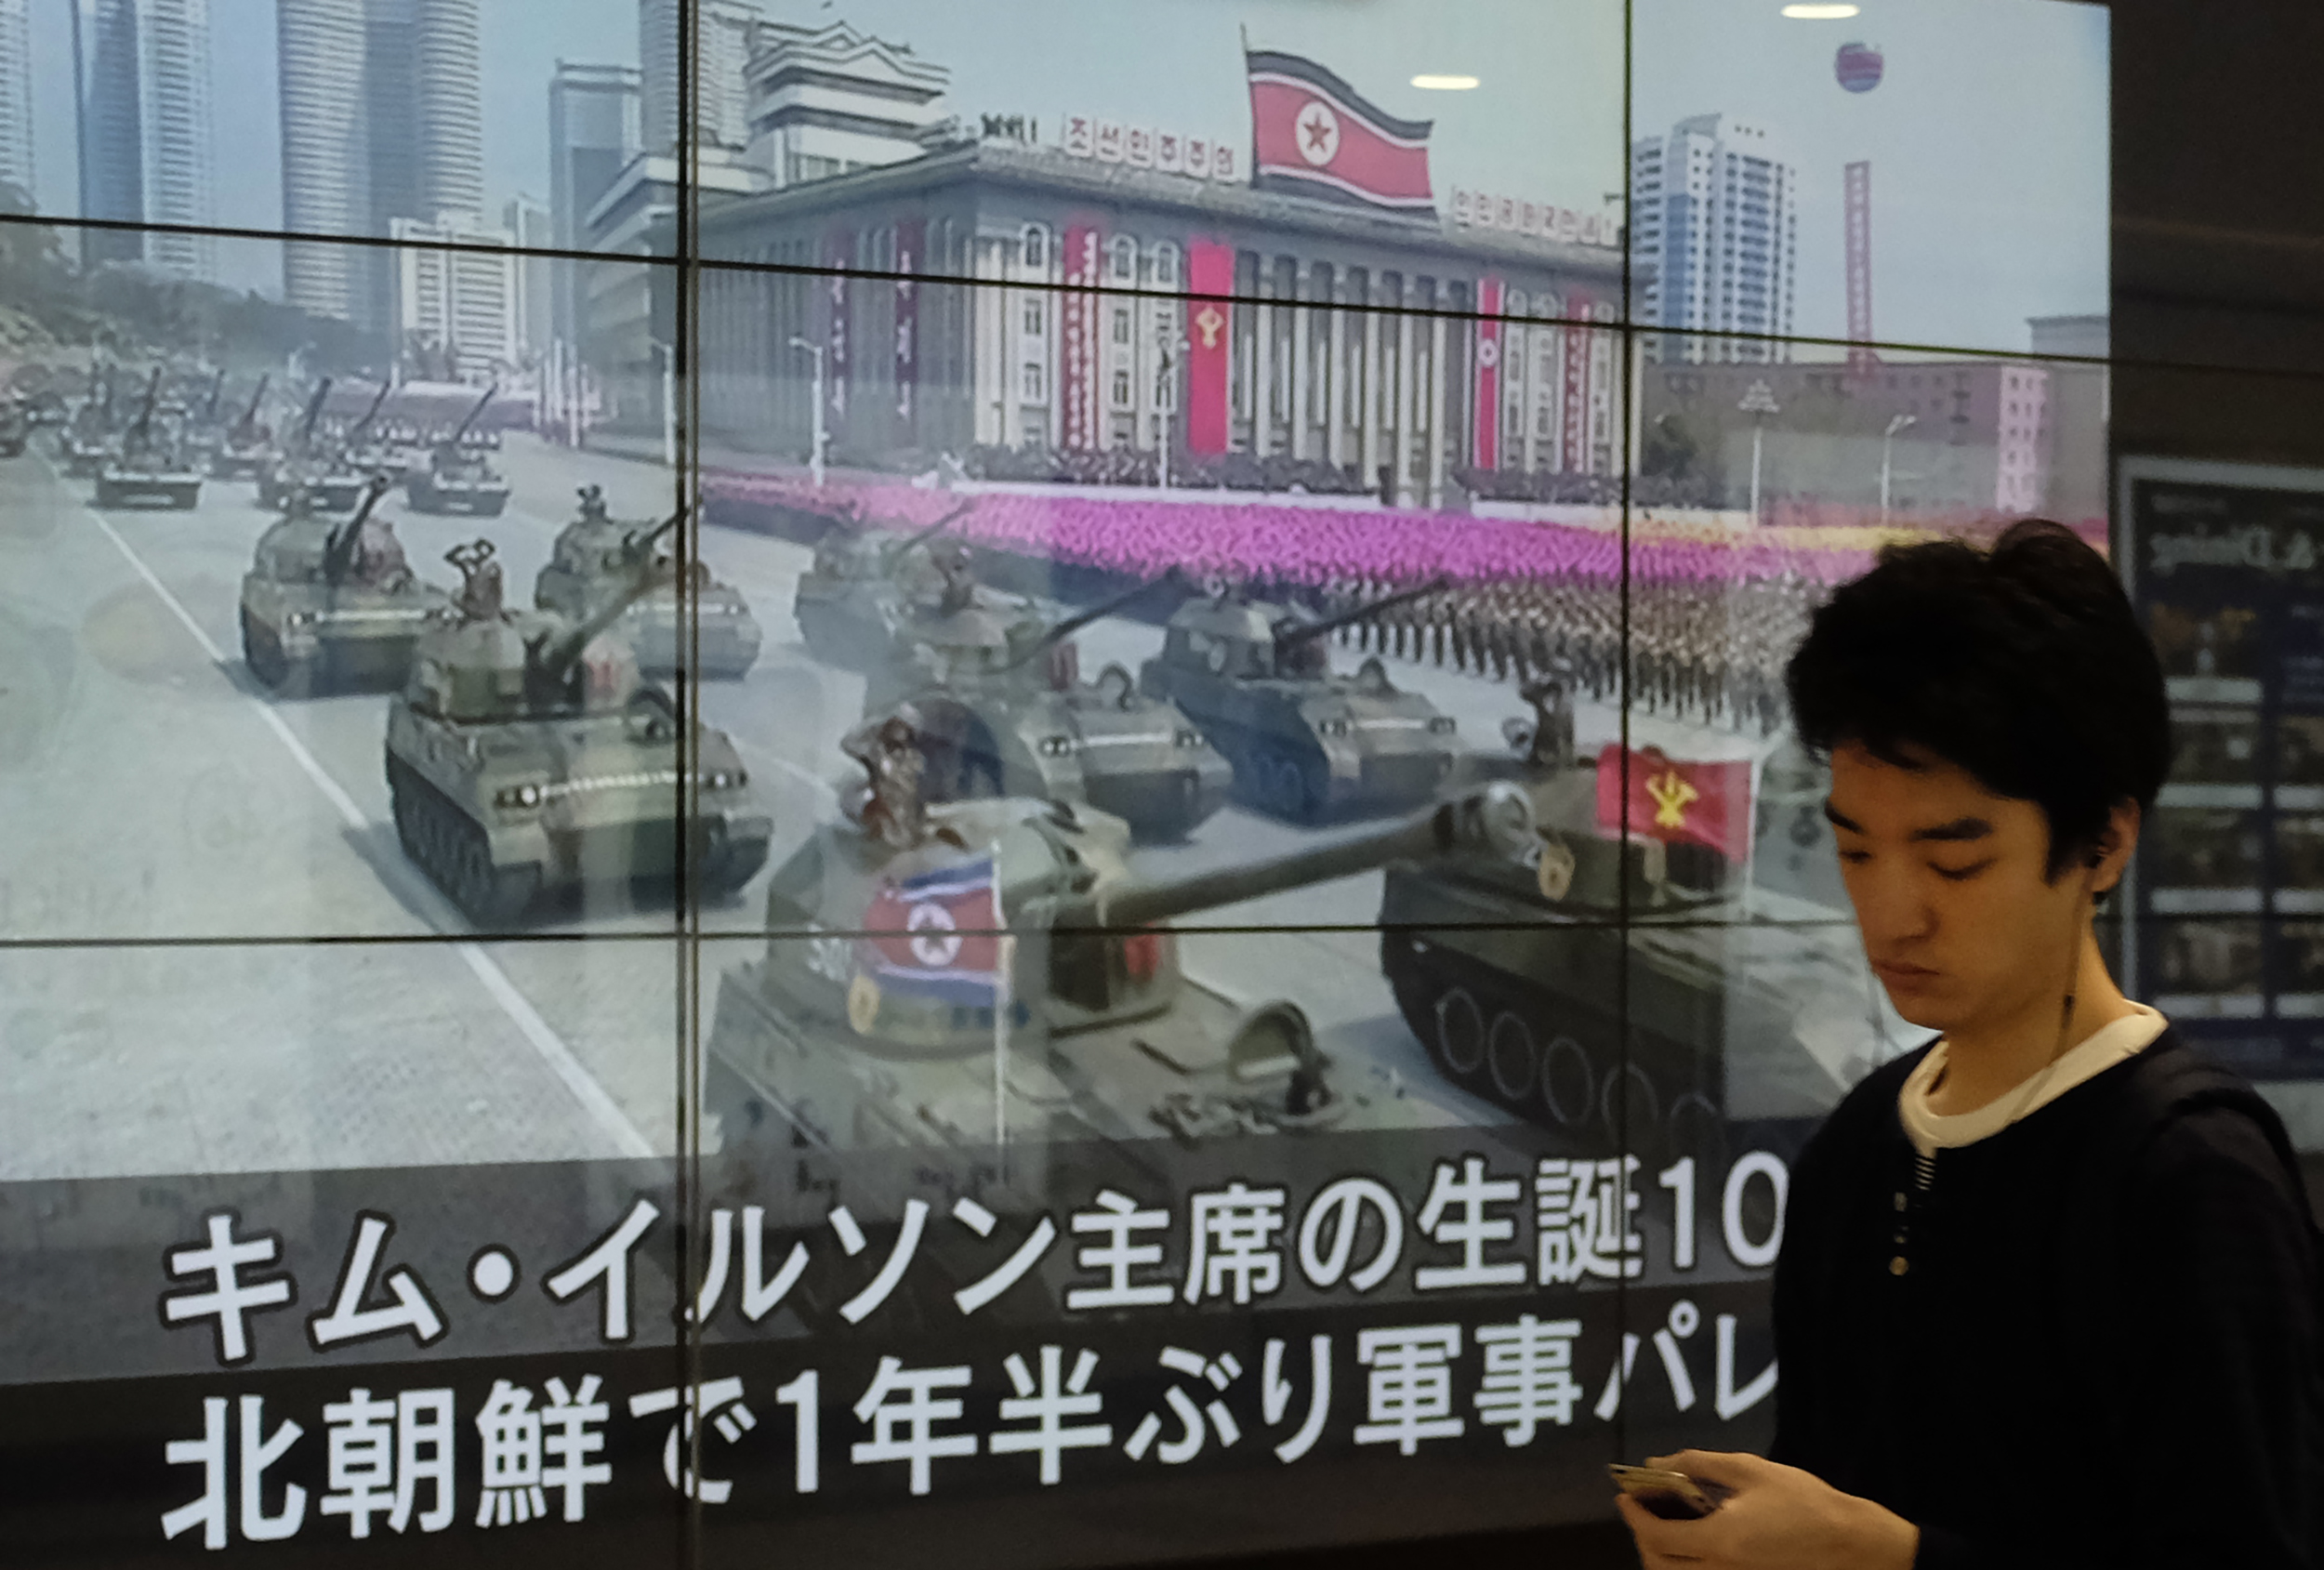 A man in Tokyo walks in front of a news video reporting a military parade marking the 105th anniversary of the birth of late North Korean leader Kim Il Sung on April 16, 2017. (Kazuhiro Nogi—AFP/Getty Images)